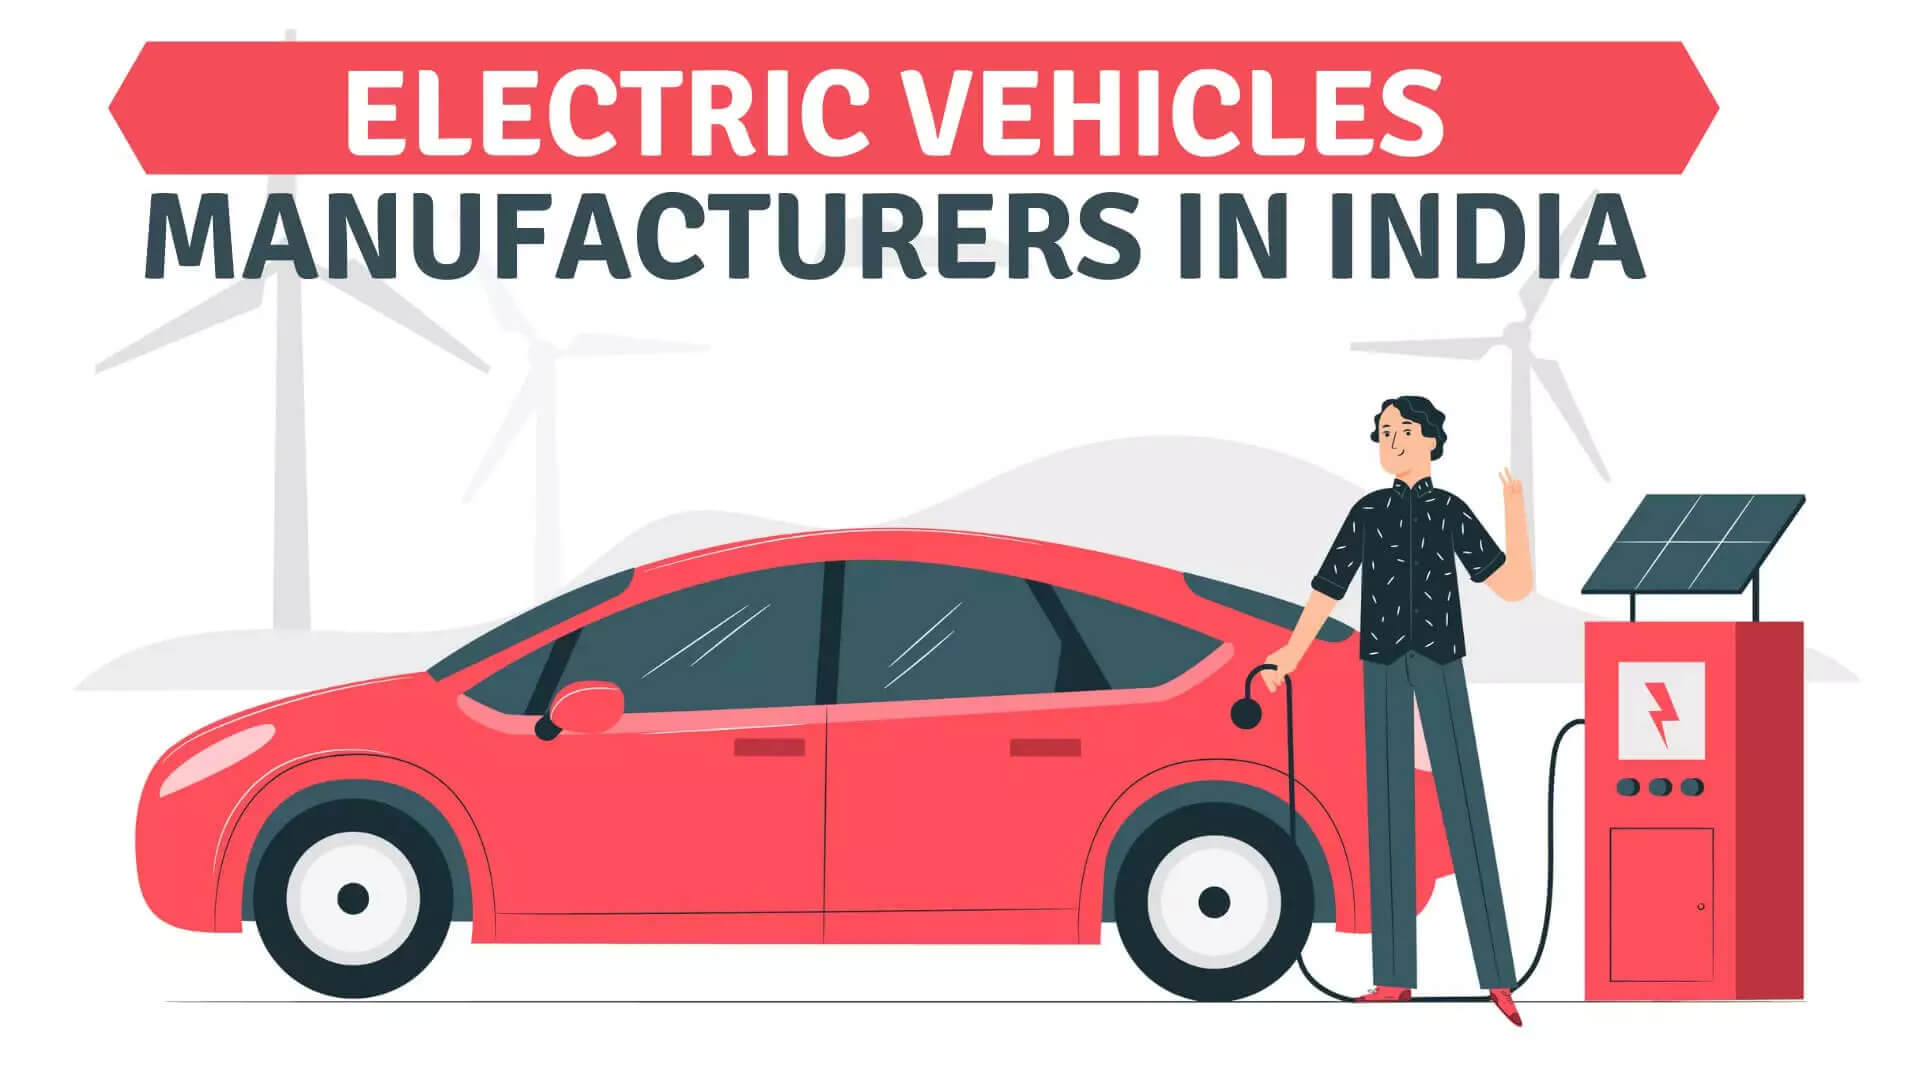 https://e-vehicleinfo.com/top-10-electric-vehicle-manufacturers-in-india/